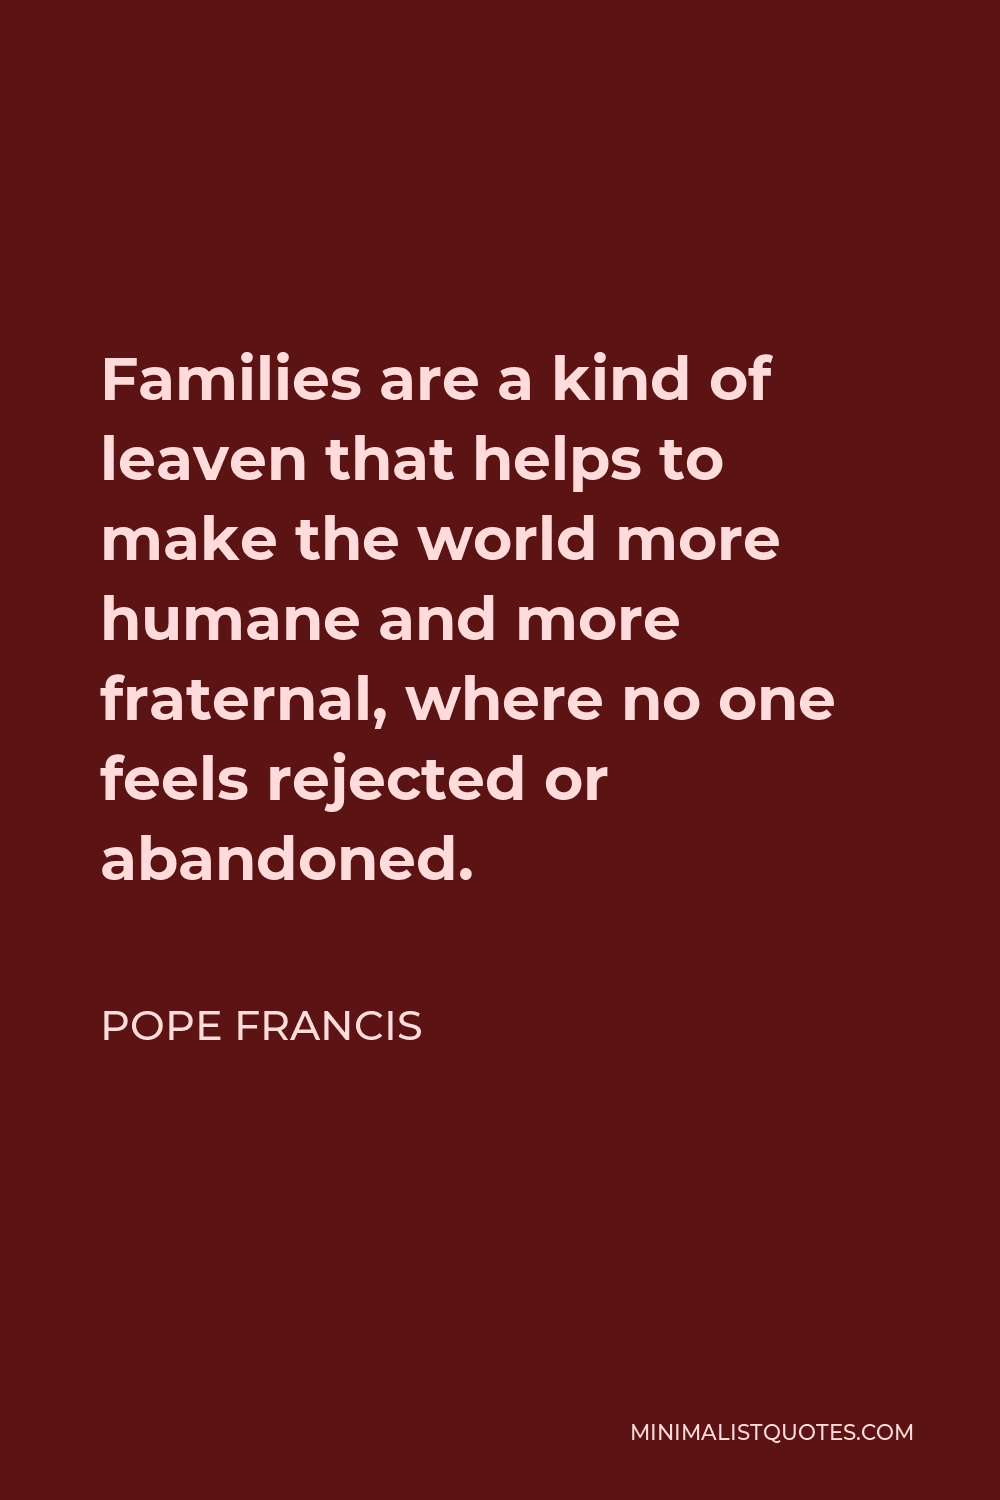 Pope Francis Quote - Families are a kind of leaven that helps to make the world more humane and more fraternal, where no one feels rejected or abandoned.